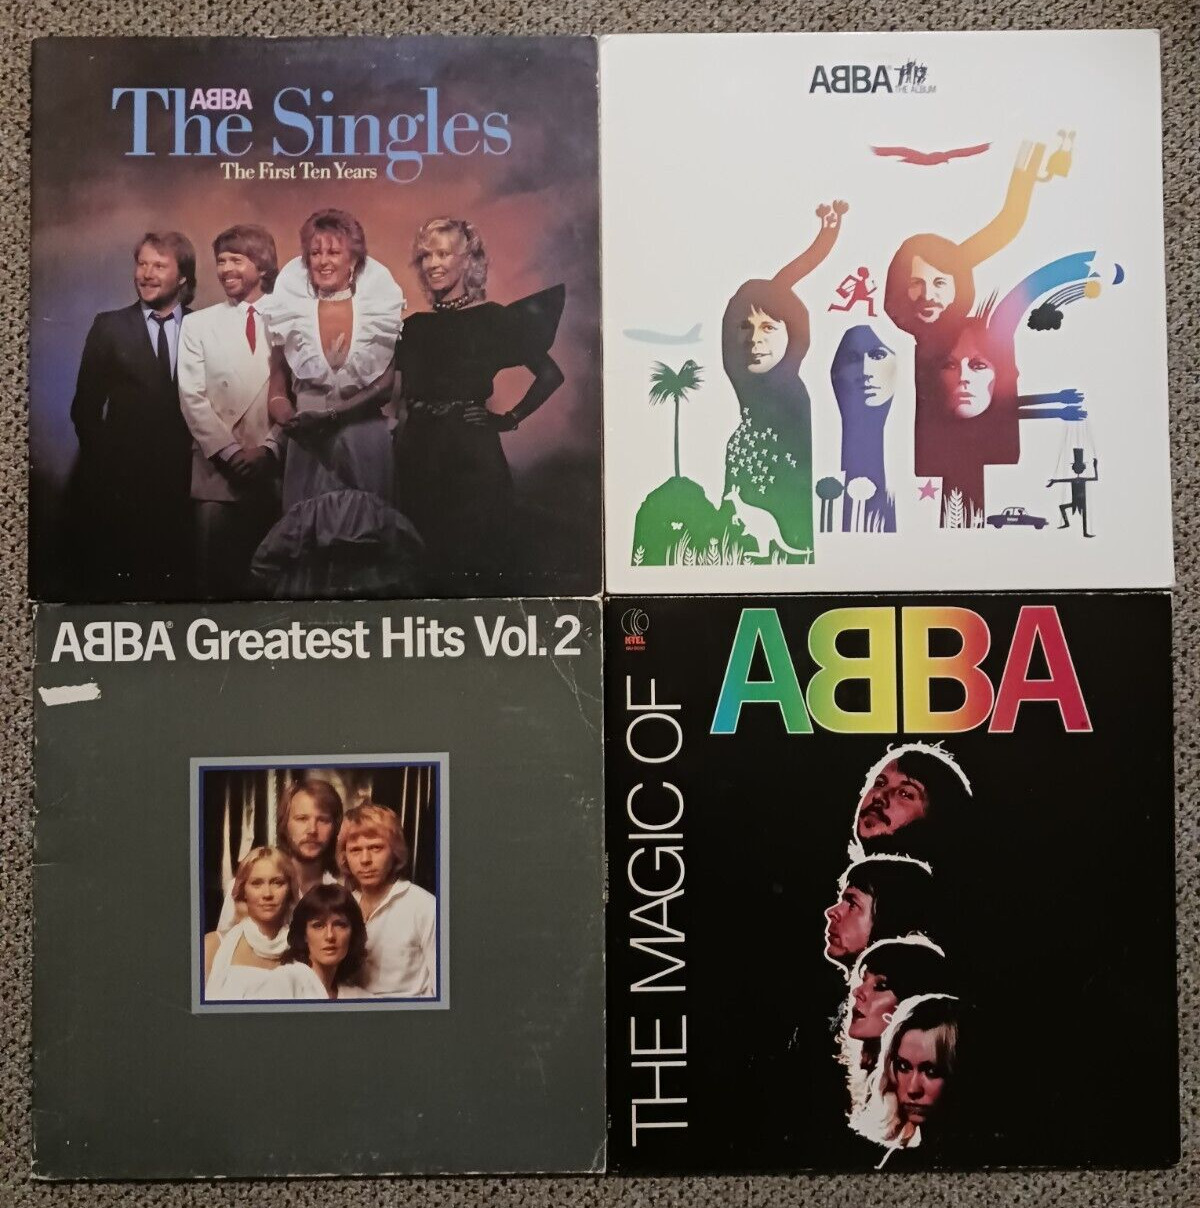 Lot of 4 ABBA LP Album Jackets Only: The Singles Greatest Hits Vol. 2 The Magic